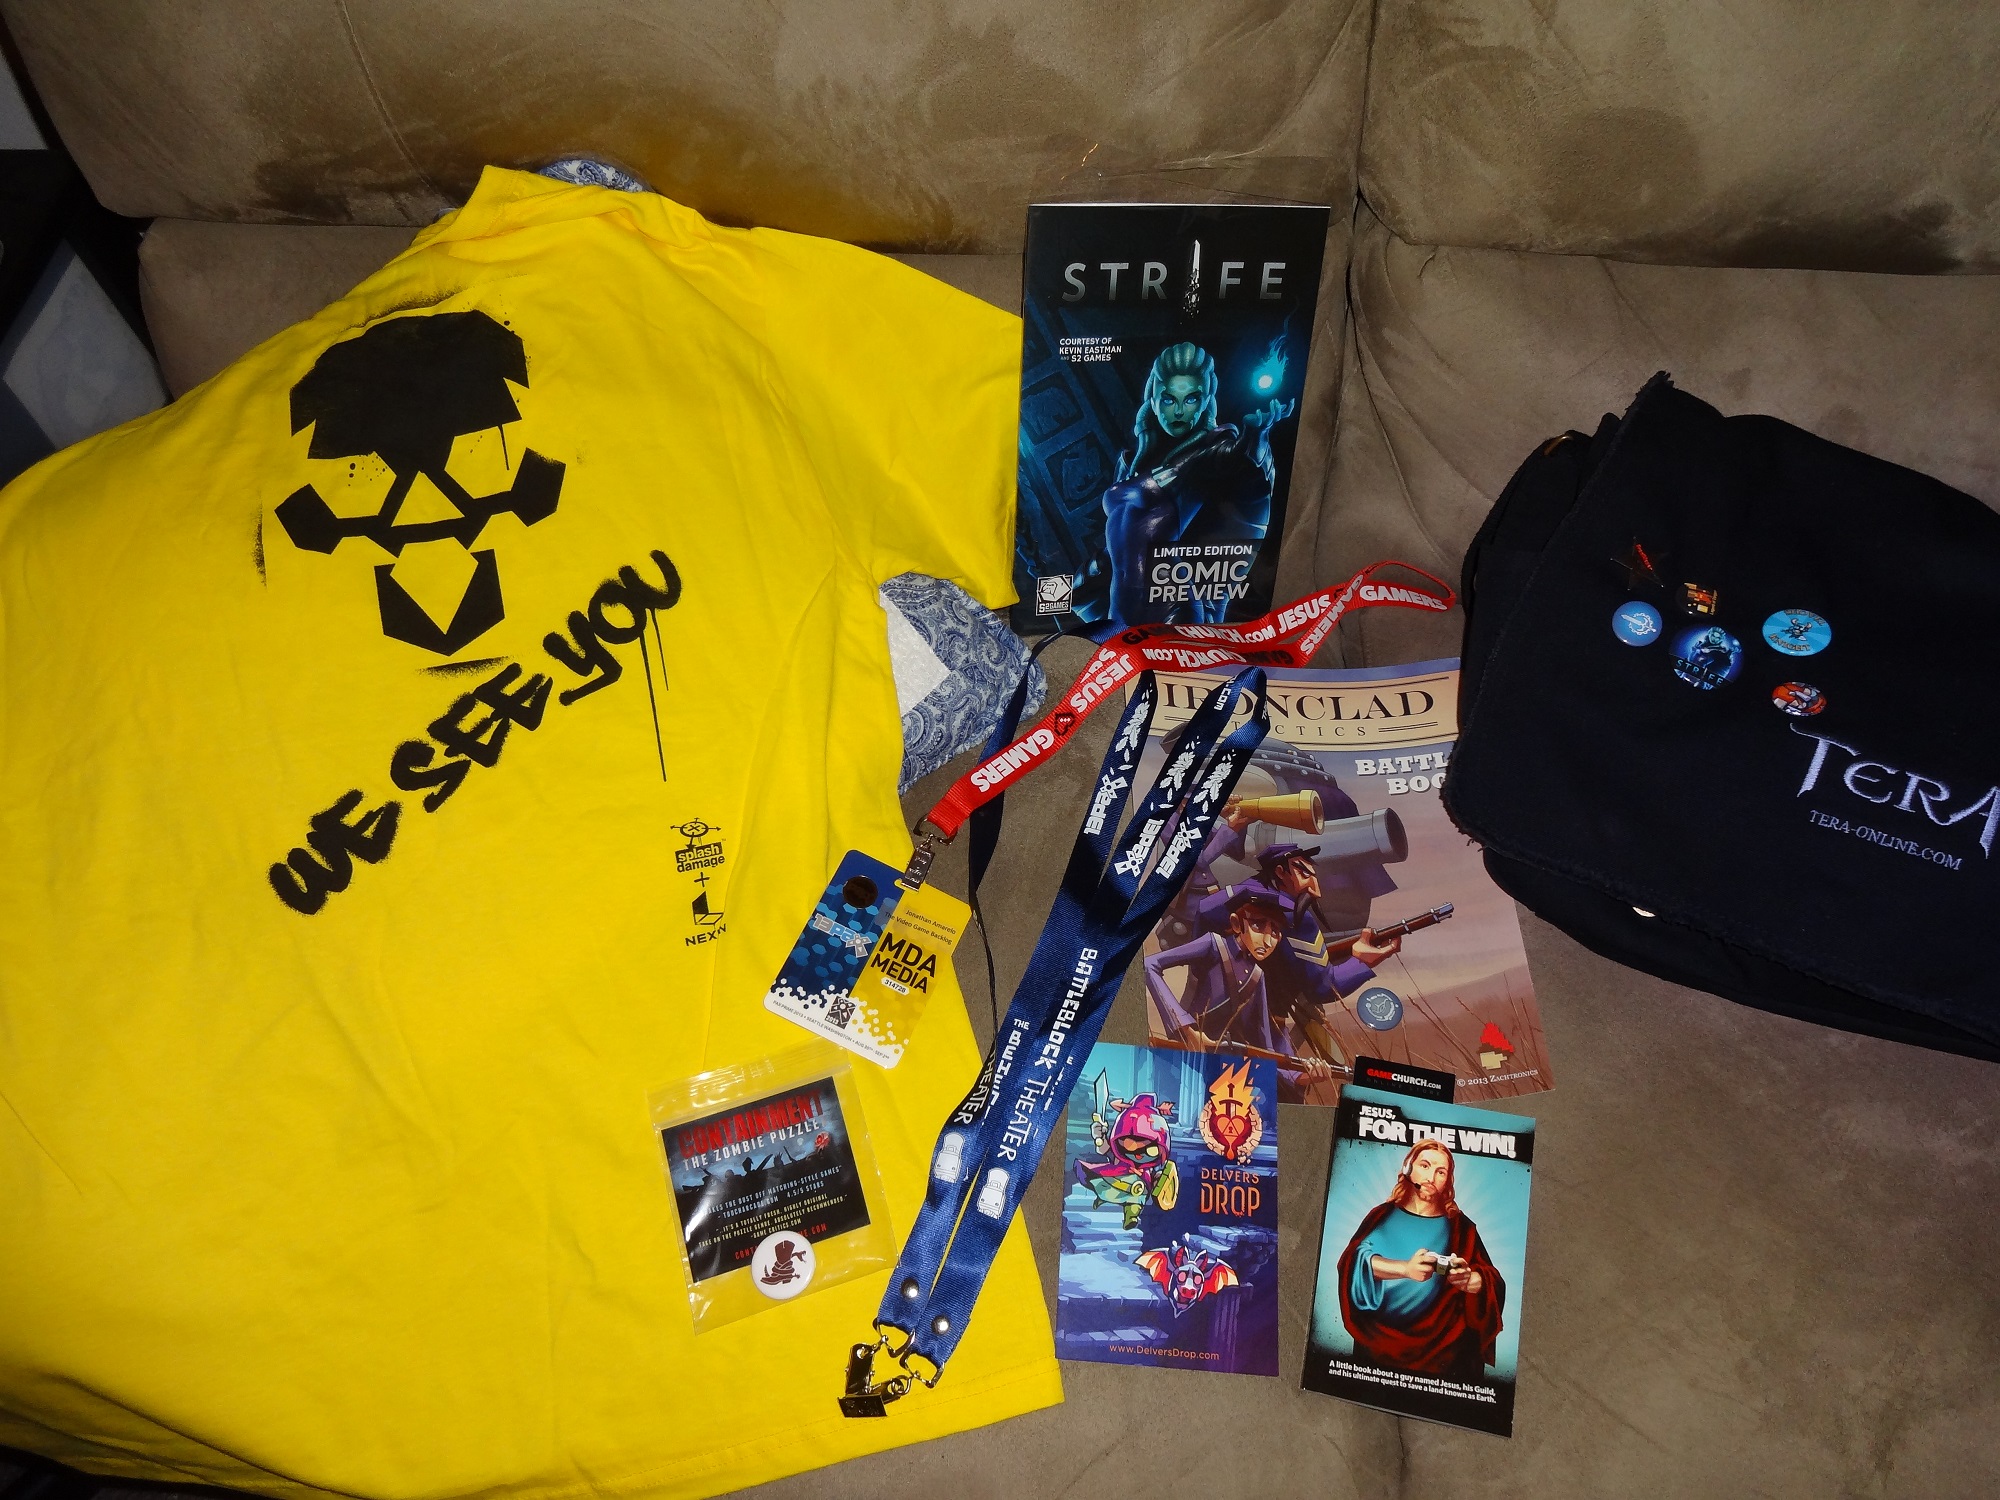 Some of my swag. Looking forward to a bit more tomorrow, but I wasn't really going out of my way this year.